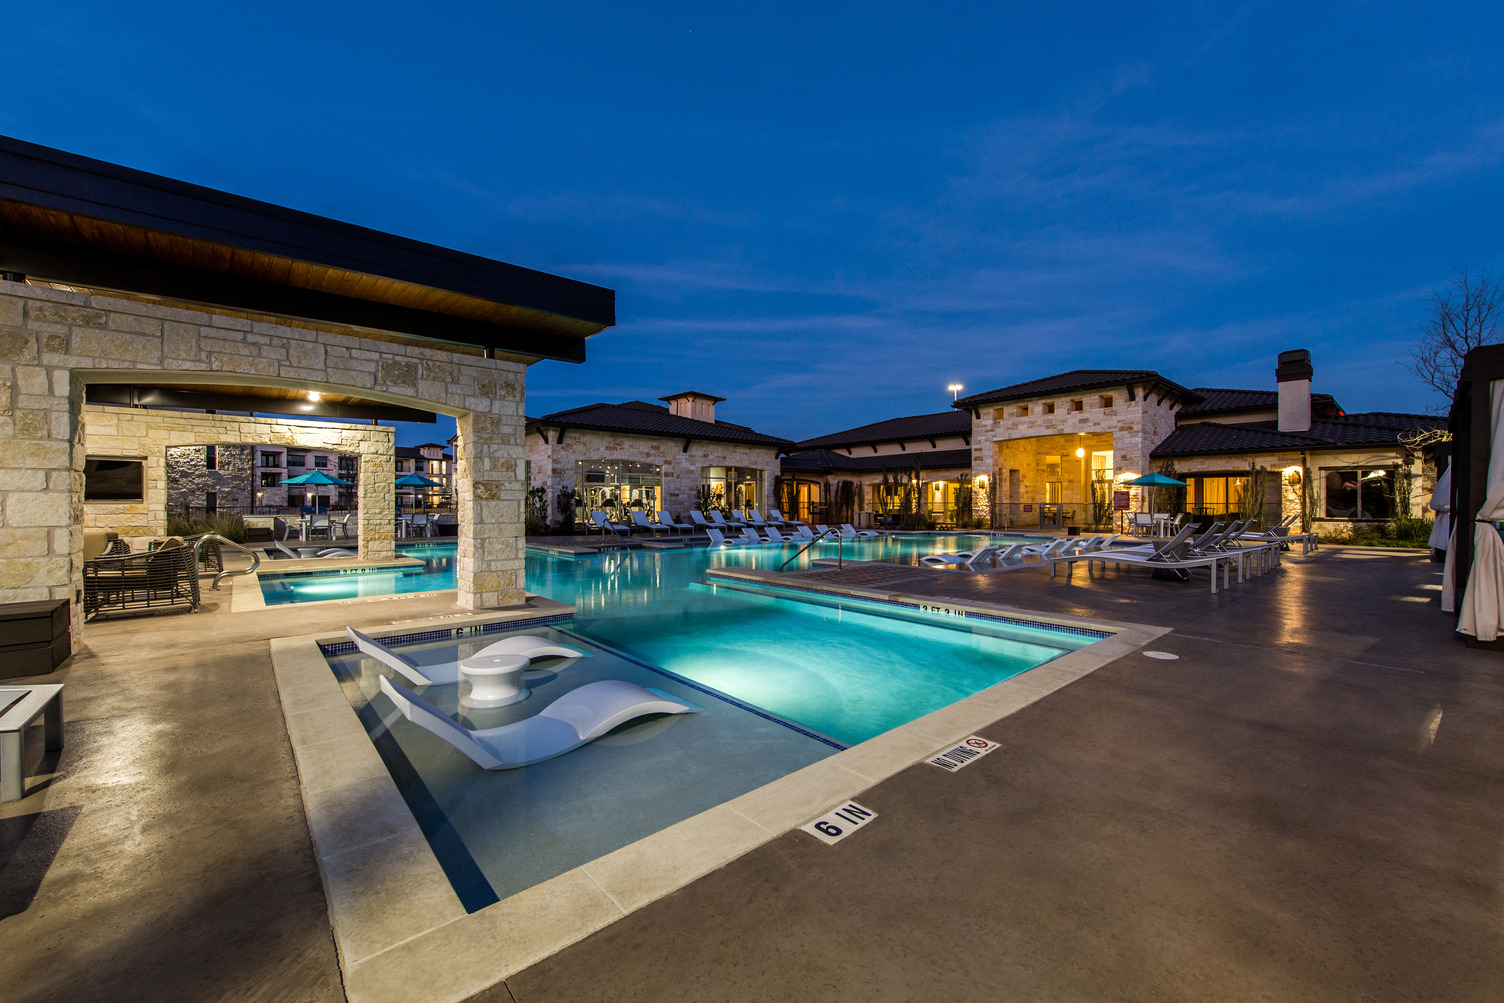 Evening view of resort-style swimming pool courtyard with lounge seating and landscaping